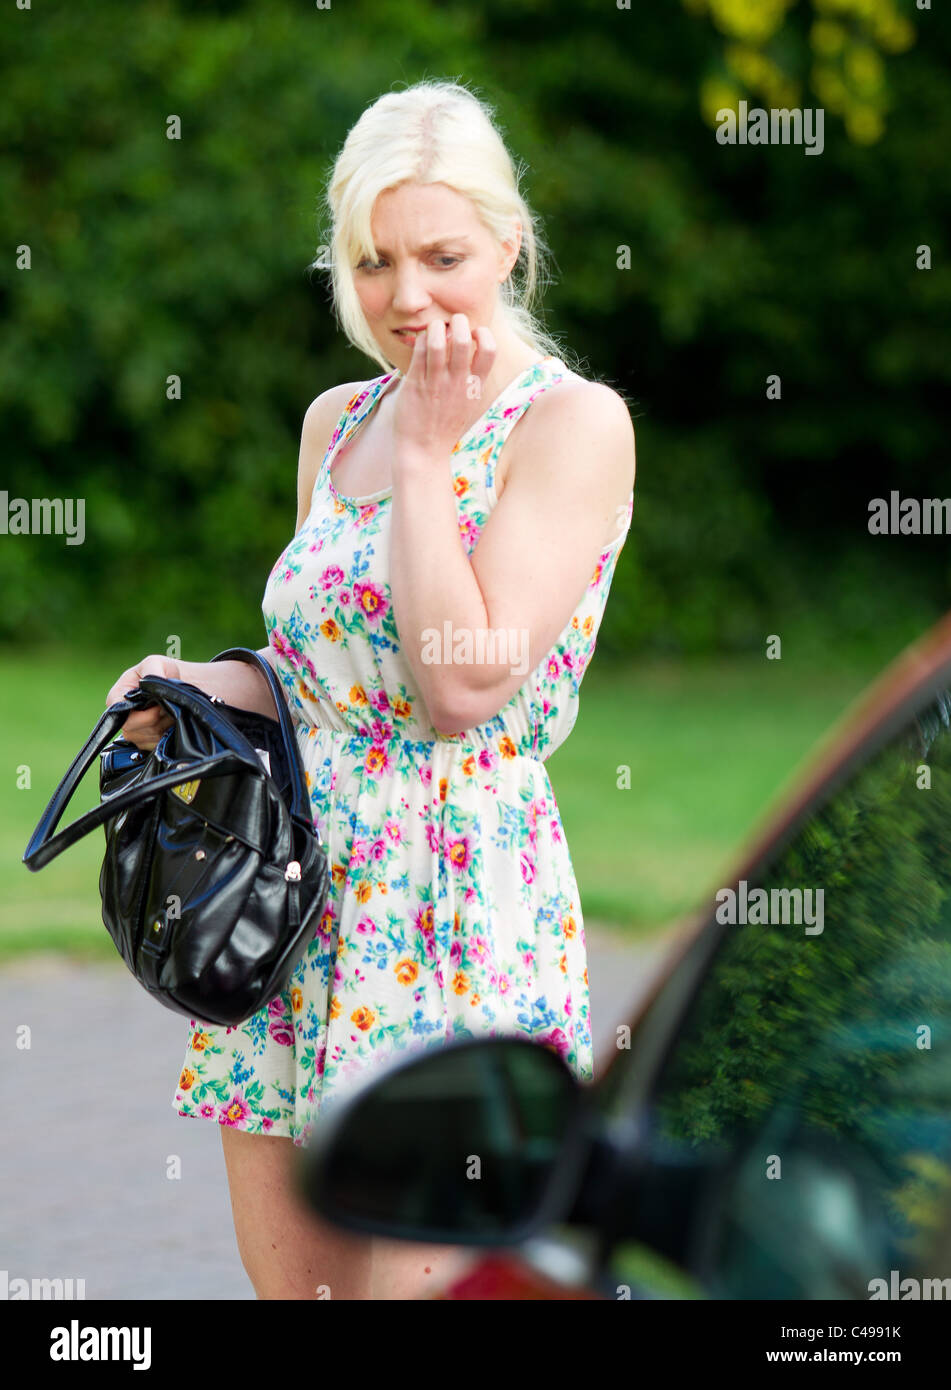 Woman looking for her lost keys Stock Photo